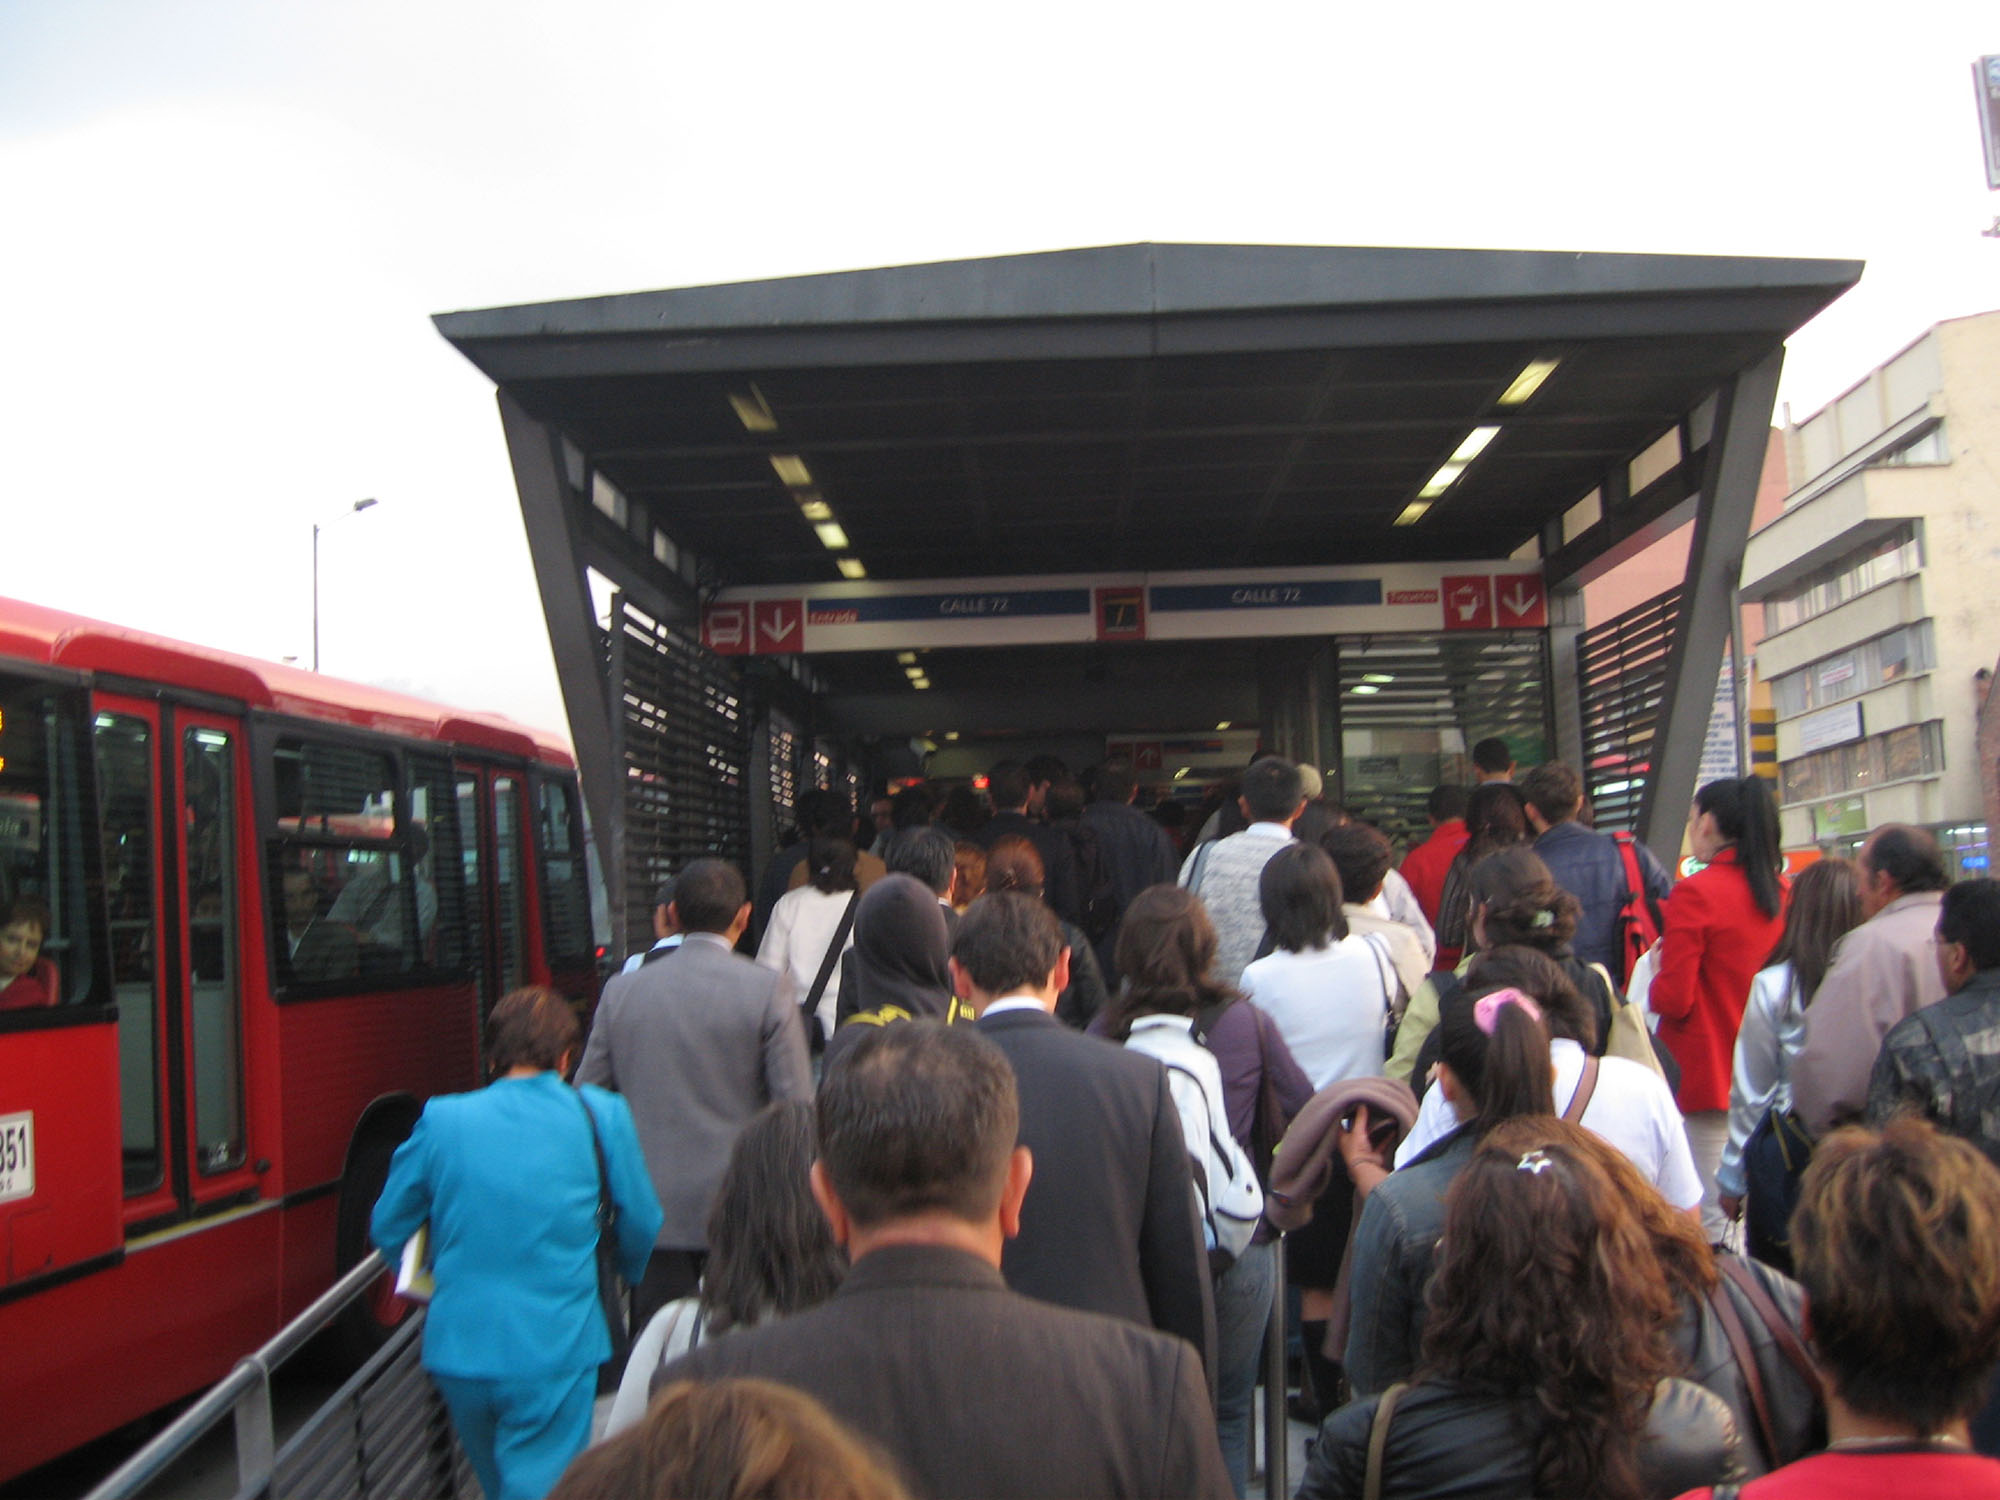 Fig. 7.1 Designing a system along corridors with demands exceeding 30,000 passengers per hour per direction, like the one in Bogotá is quite different from designing systems with less than 3,000 pphpd, like the one shown in figure 7.2